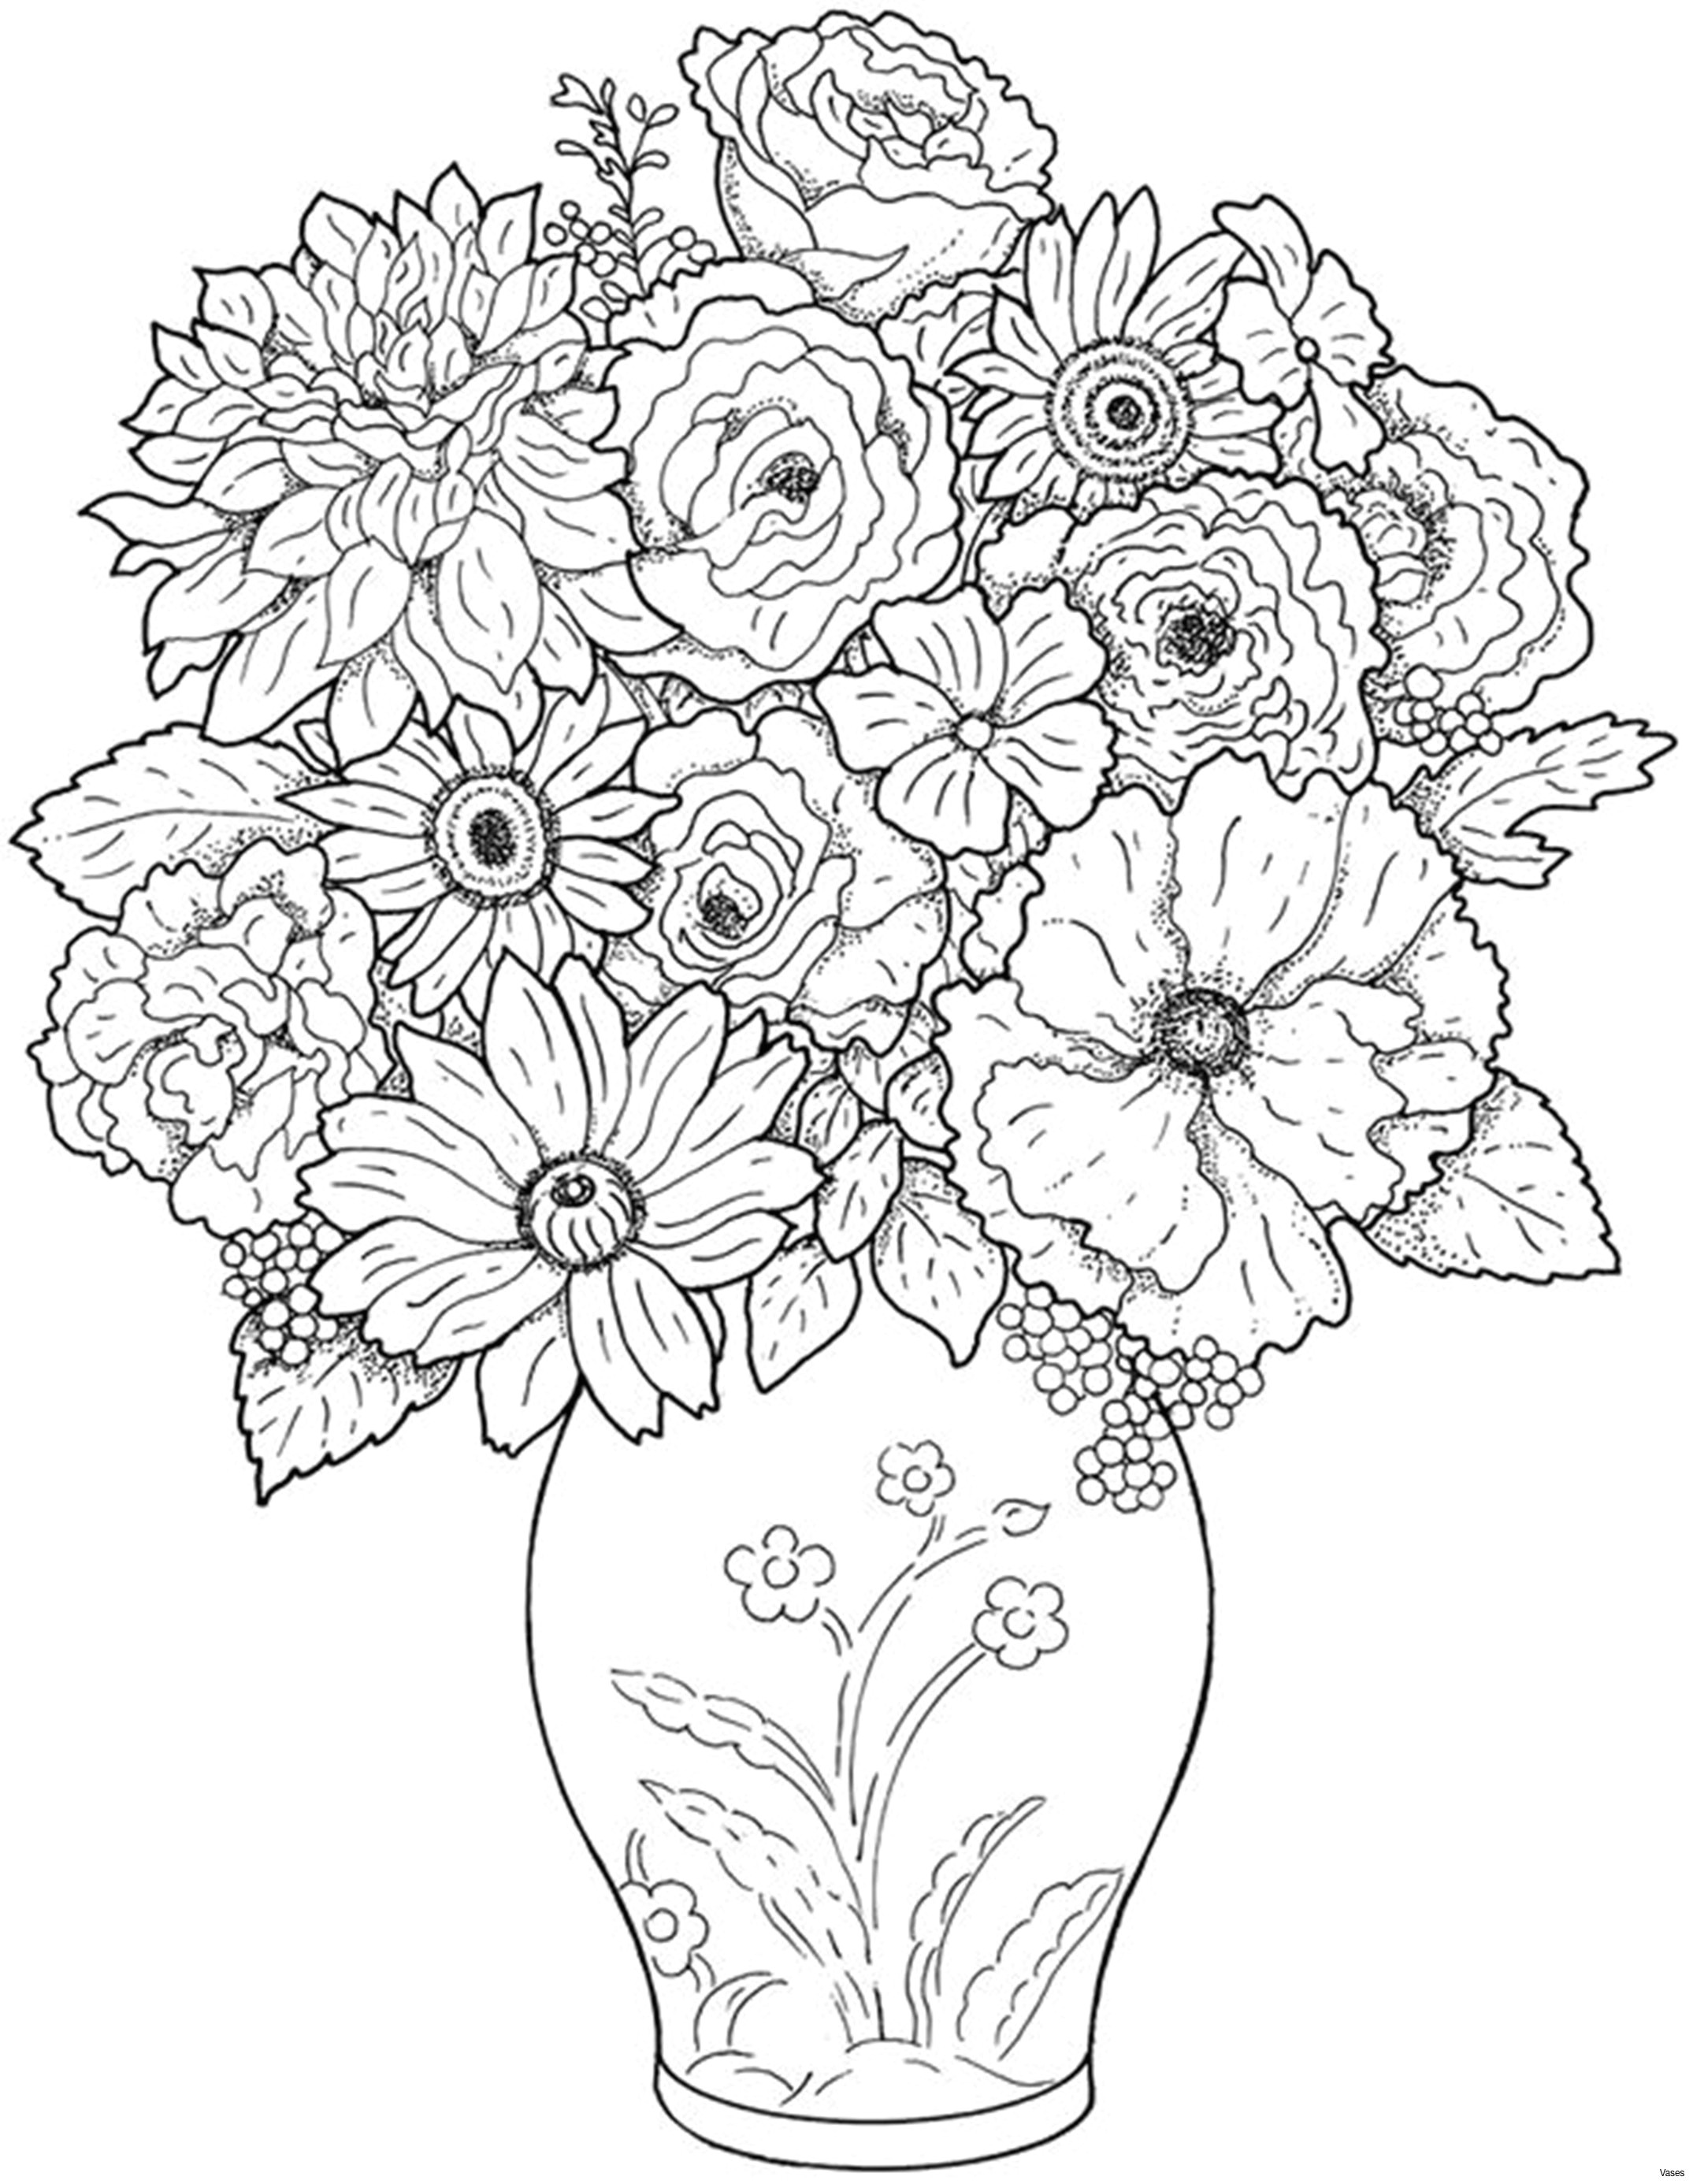 Flowers Drawing for Colouring Www Colouring Pages Aua Ergewohnliche Cool Vases Flower Vase Coloring